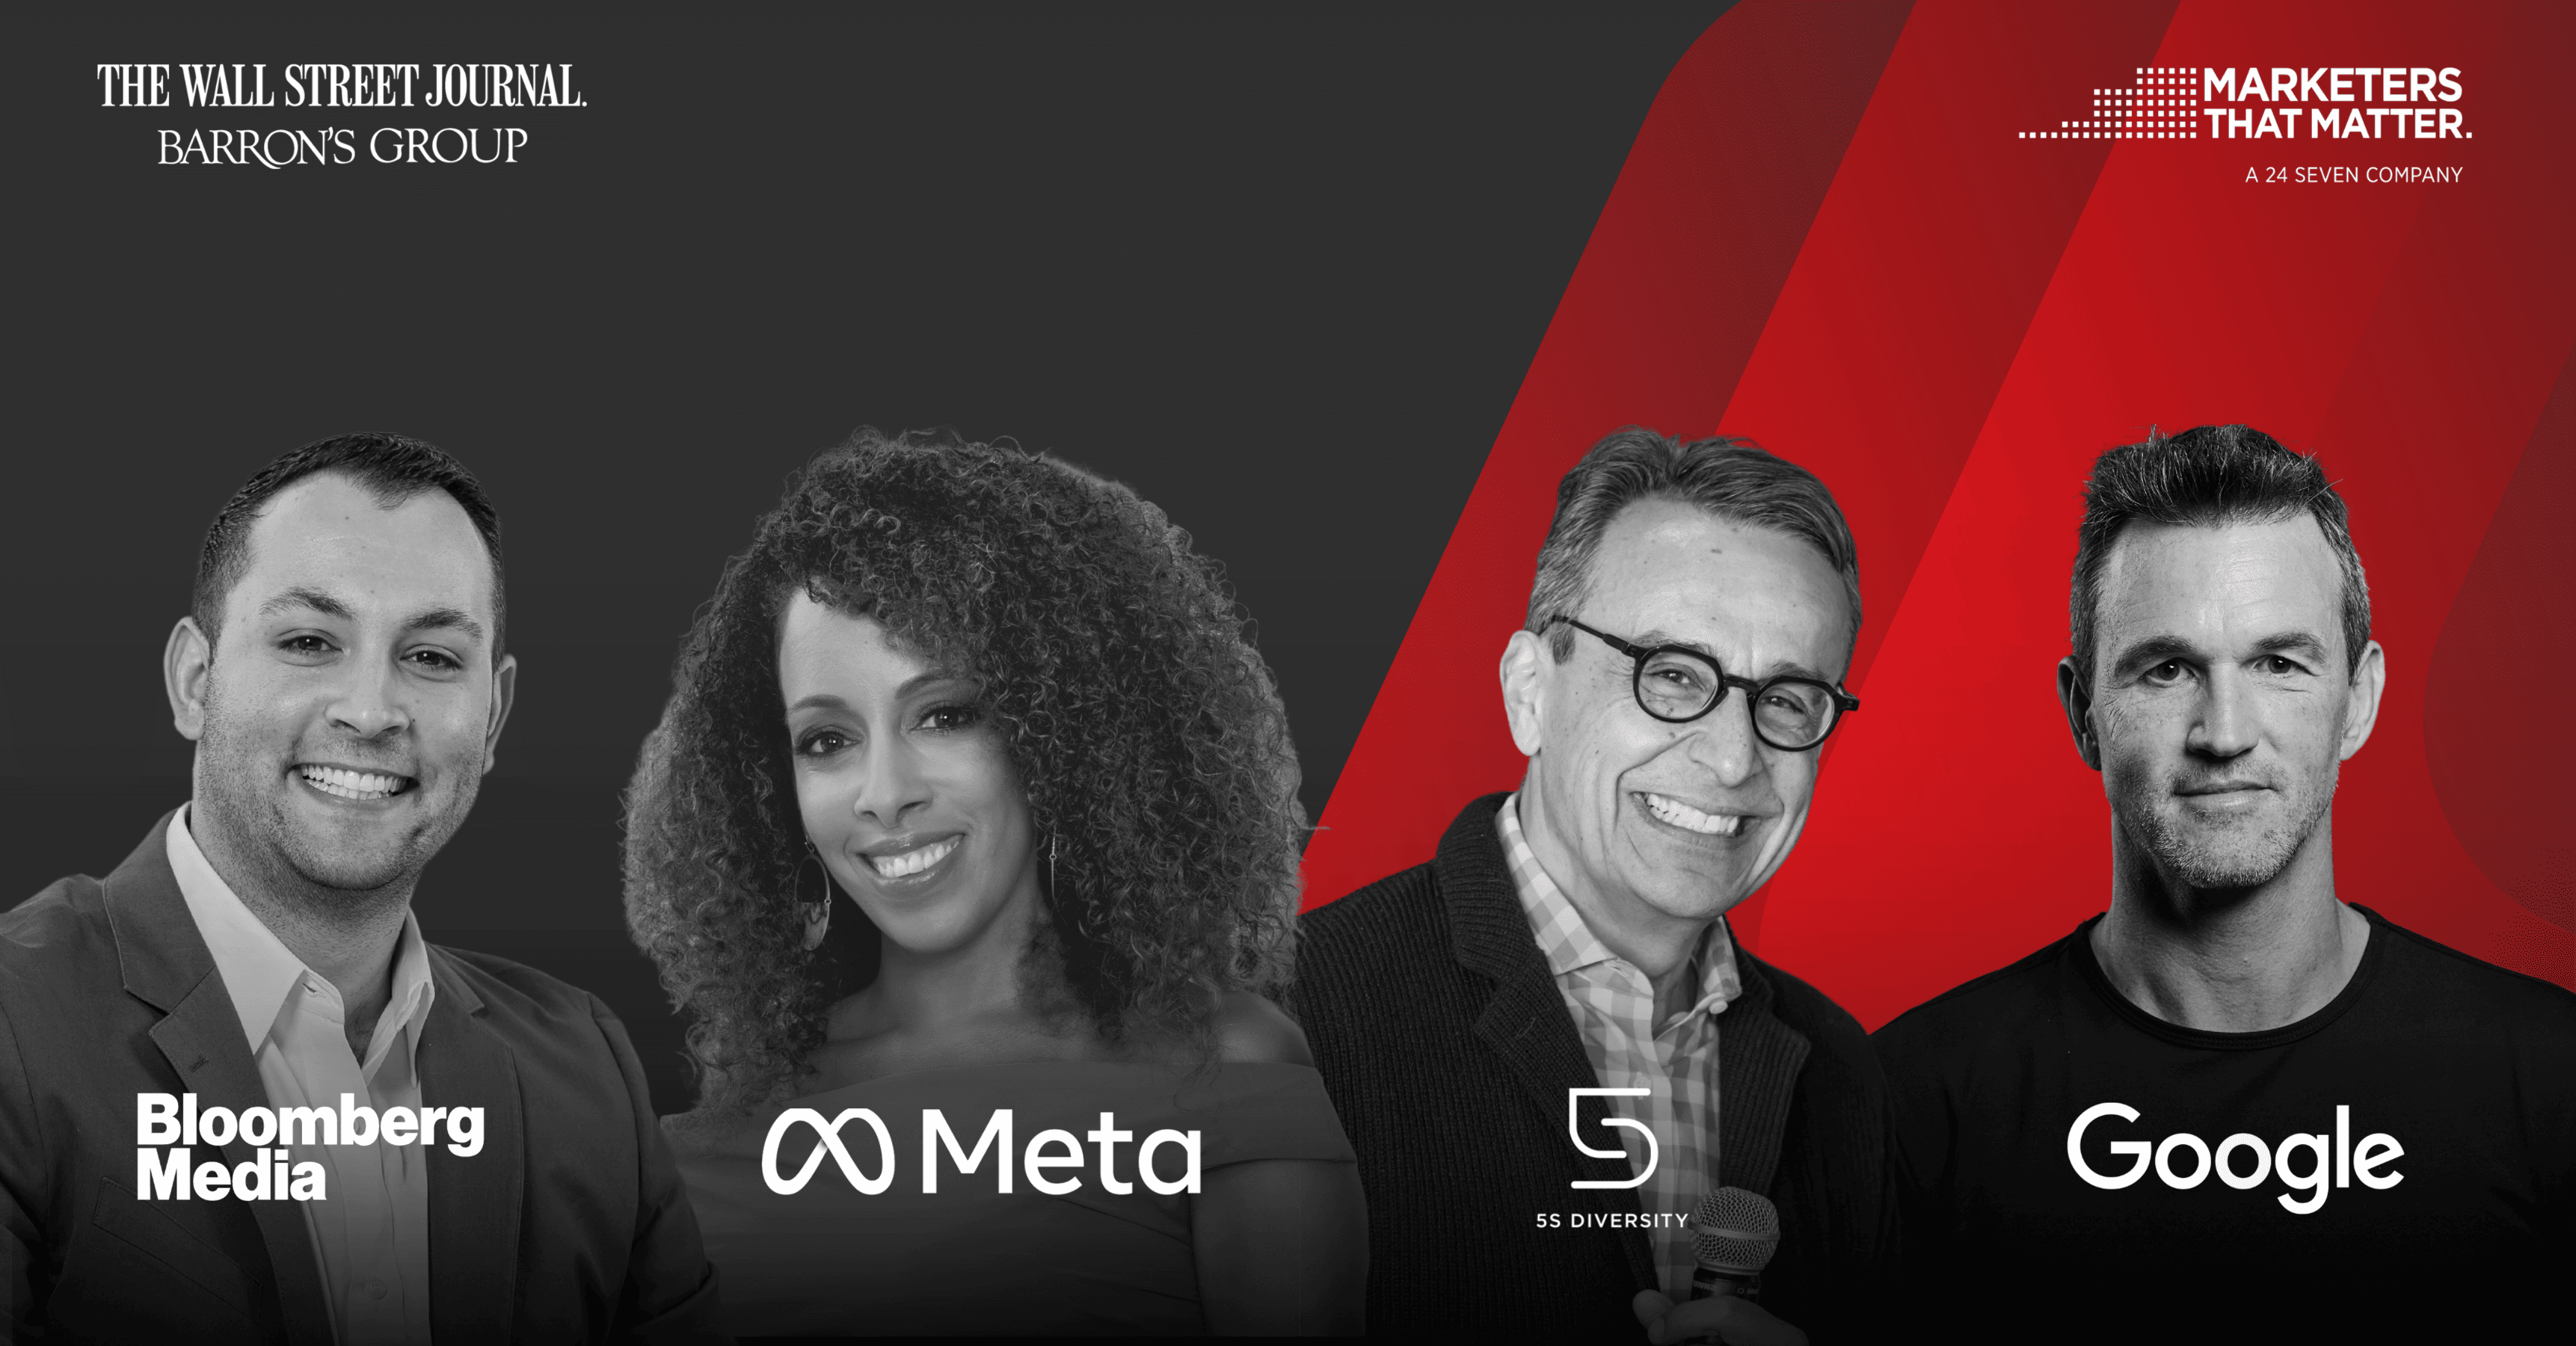 Chris Marino, Global Head of Media & Marketing Technology at Bloomberg Media and Lizette Williams, Global Head of Vertical Solutions Marketing at Meta with special co-hosts Antonio Lucio, Founder & Principal at 5S Diversity and Nick Drake VP of Marketing at Google